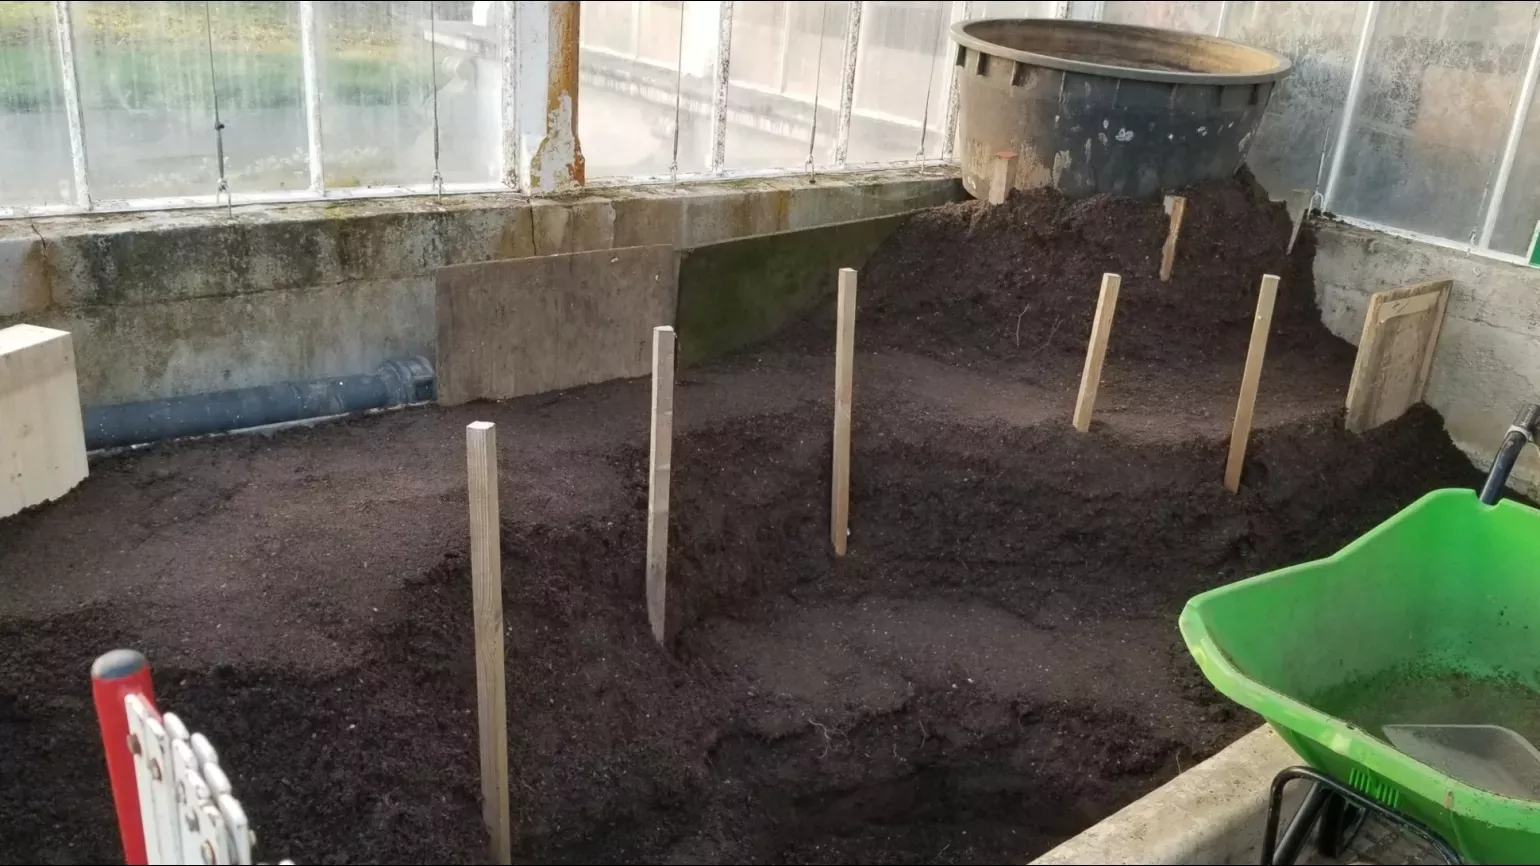 A planter filled with earth and wooden stakes